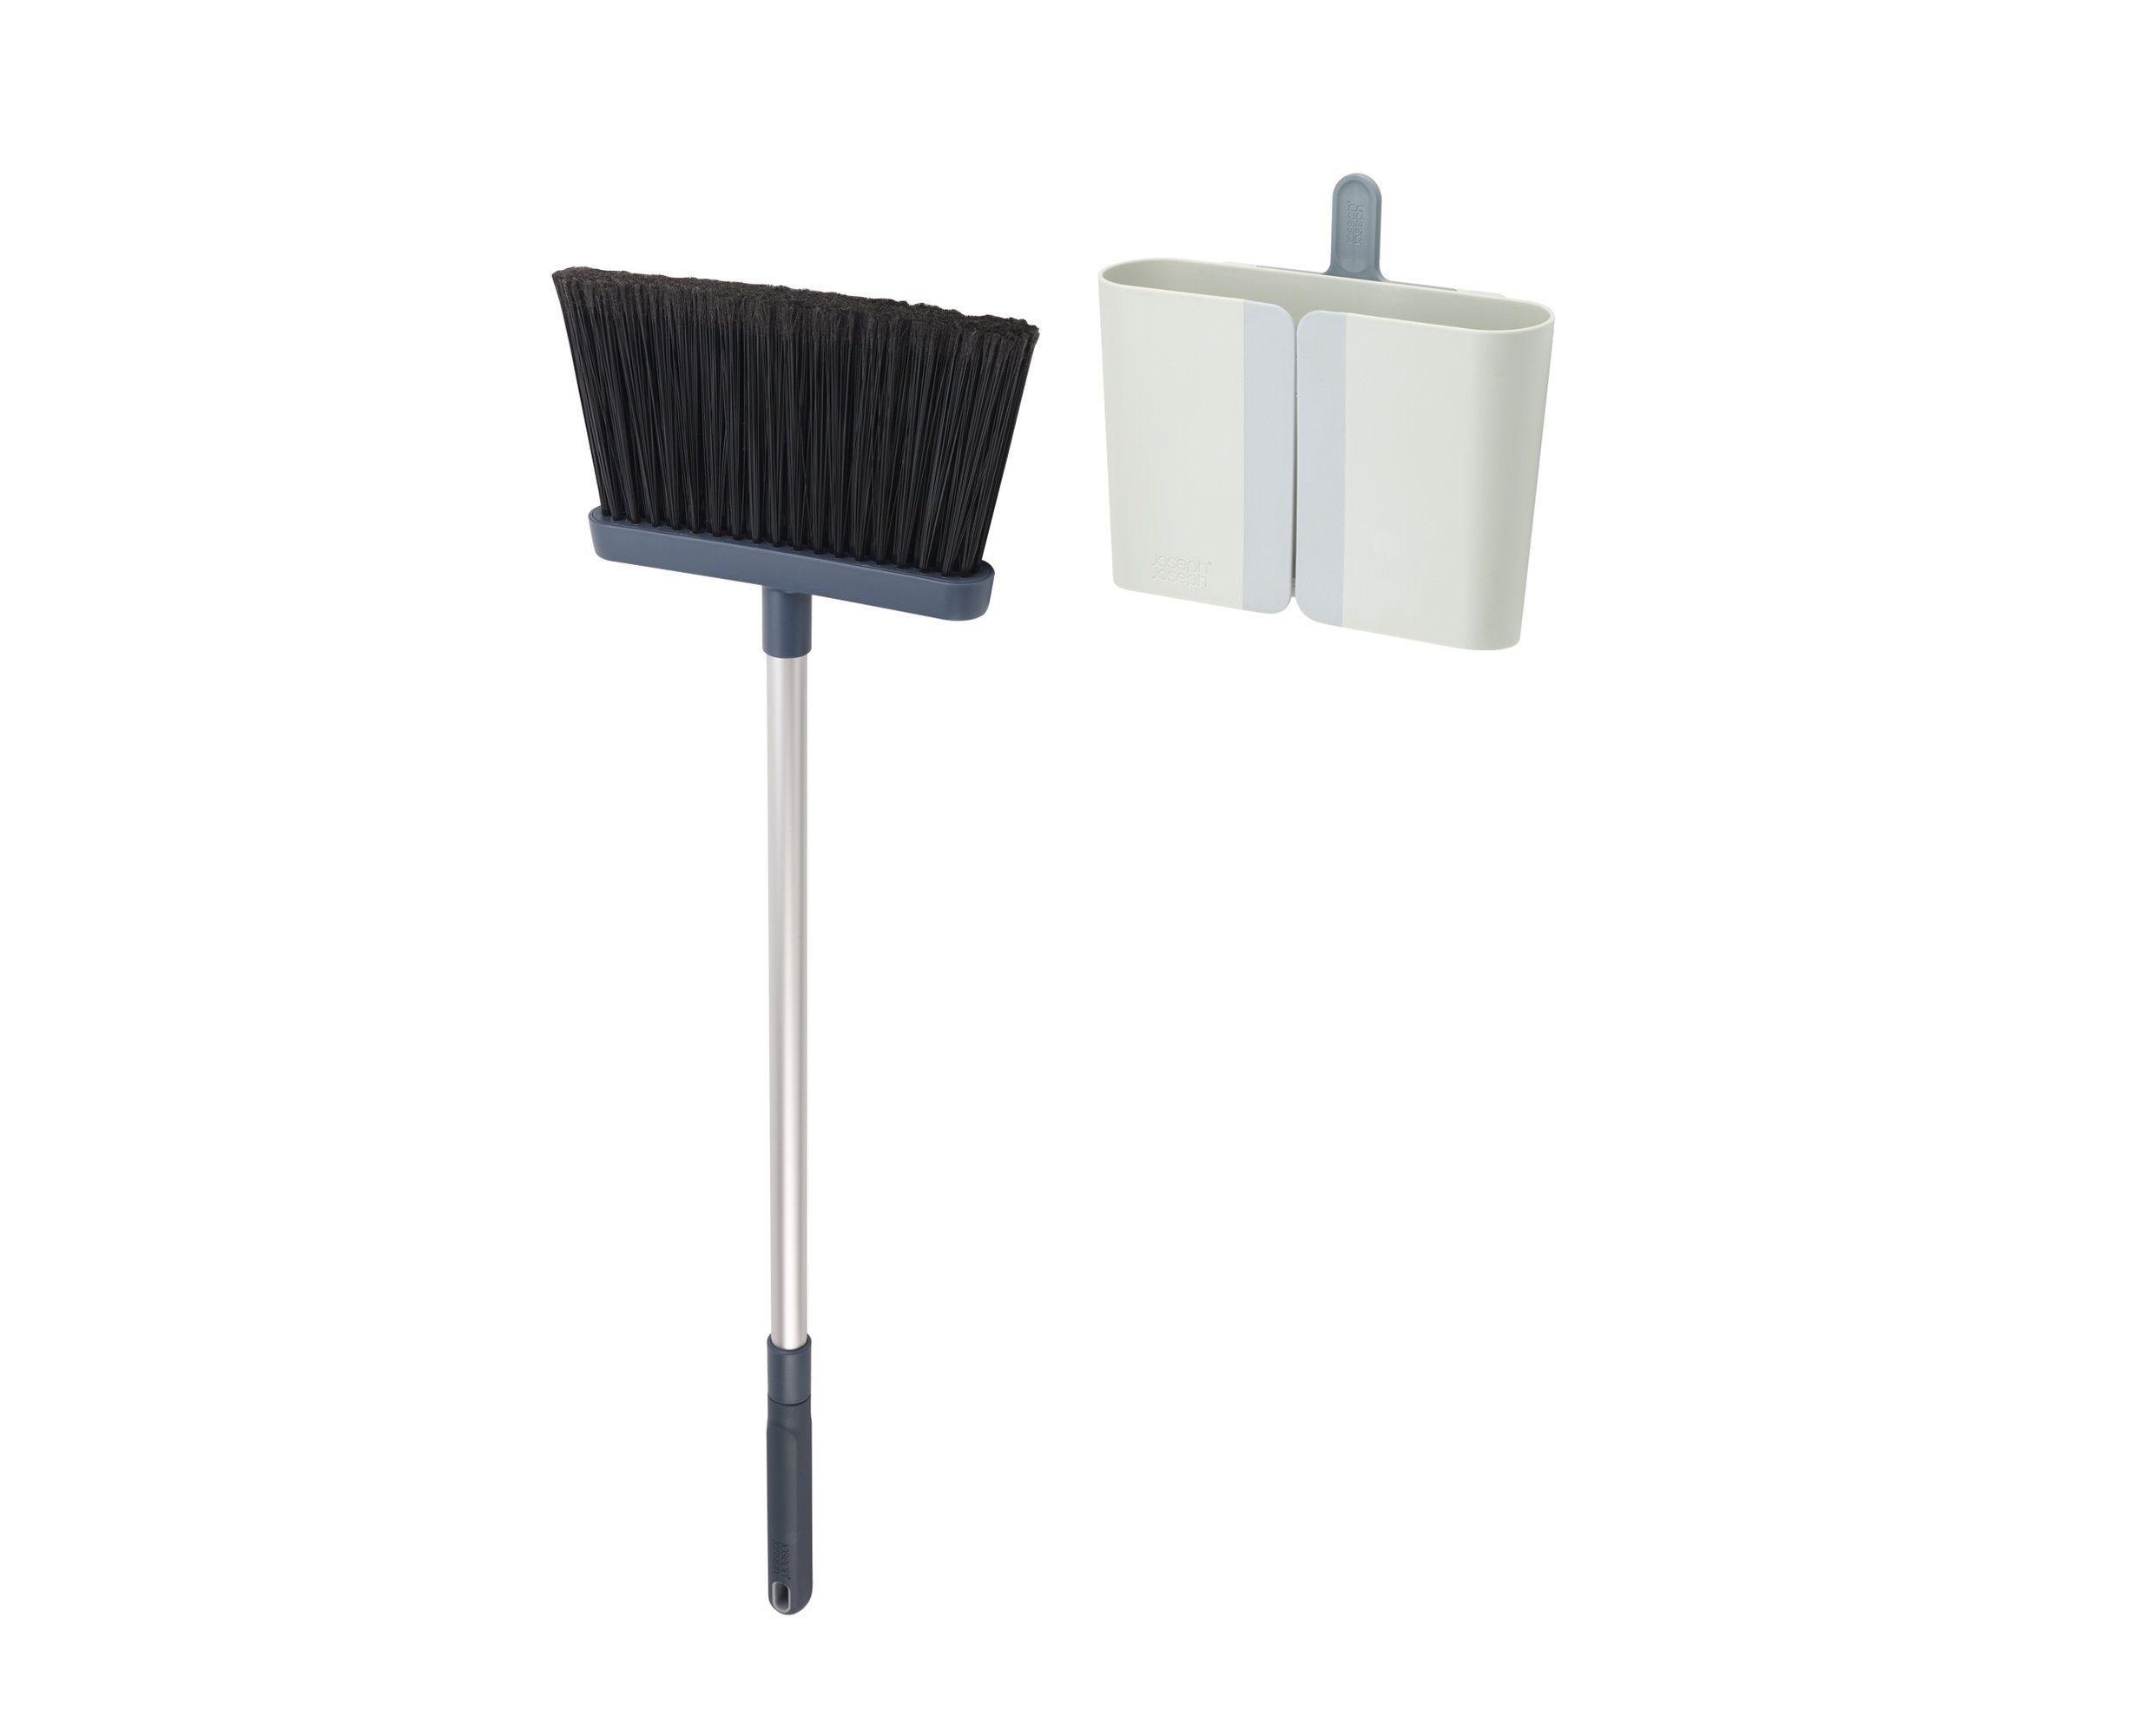 Hand Brushes  Cleanshop Online Store